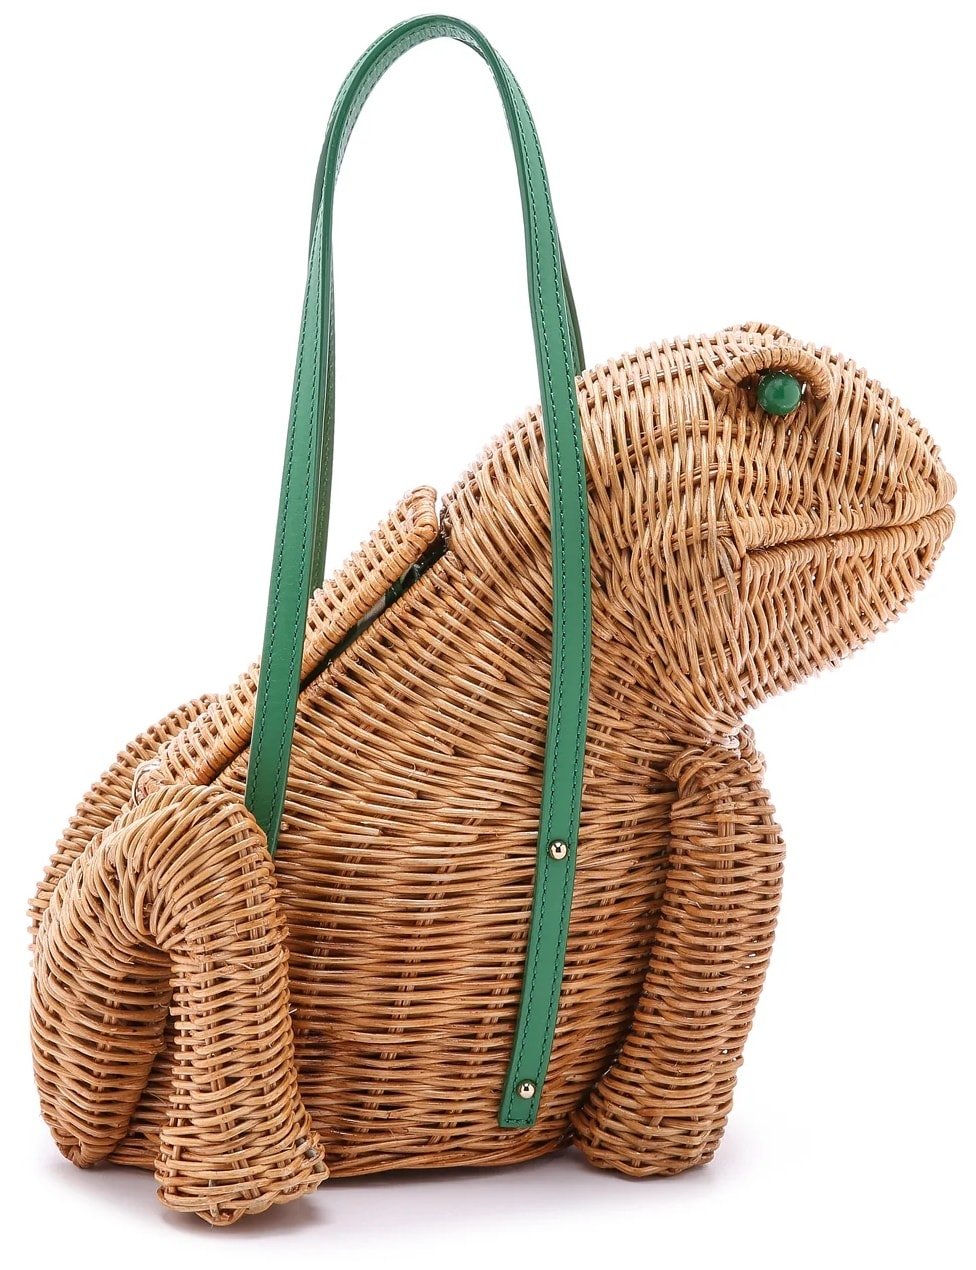 Kate Spade Women's Spring Forward Wicker Frog Bag - Natural/Sprout Green